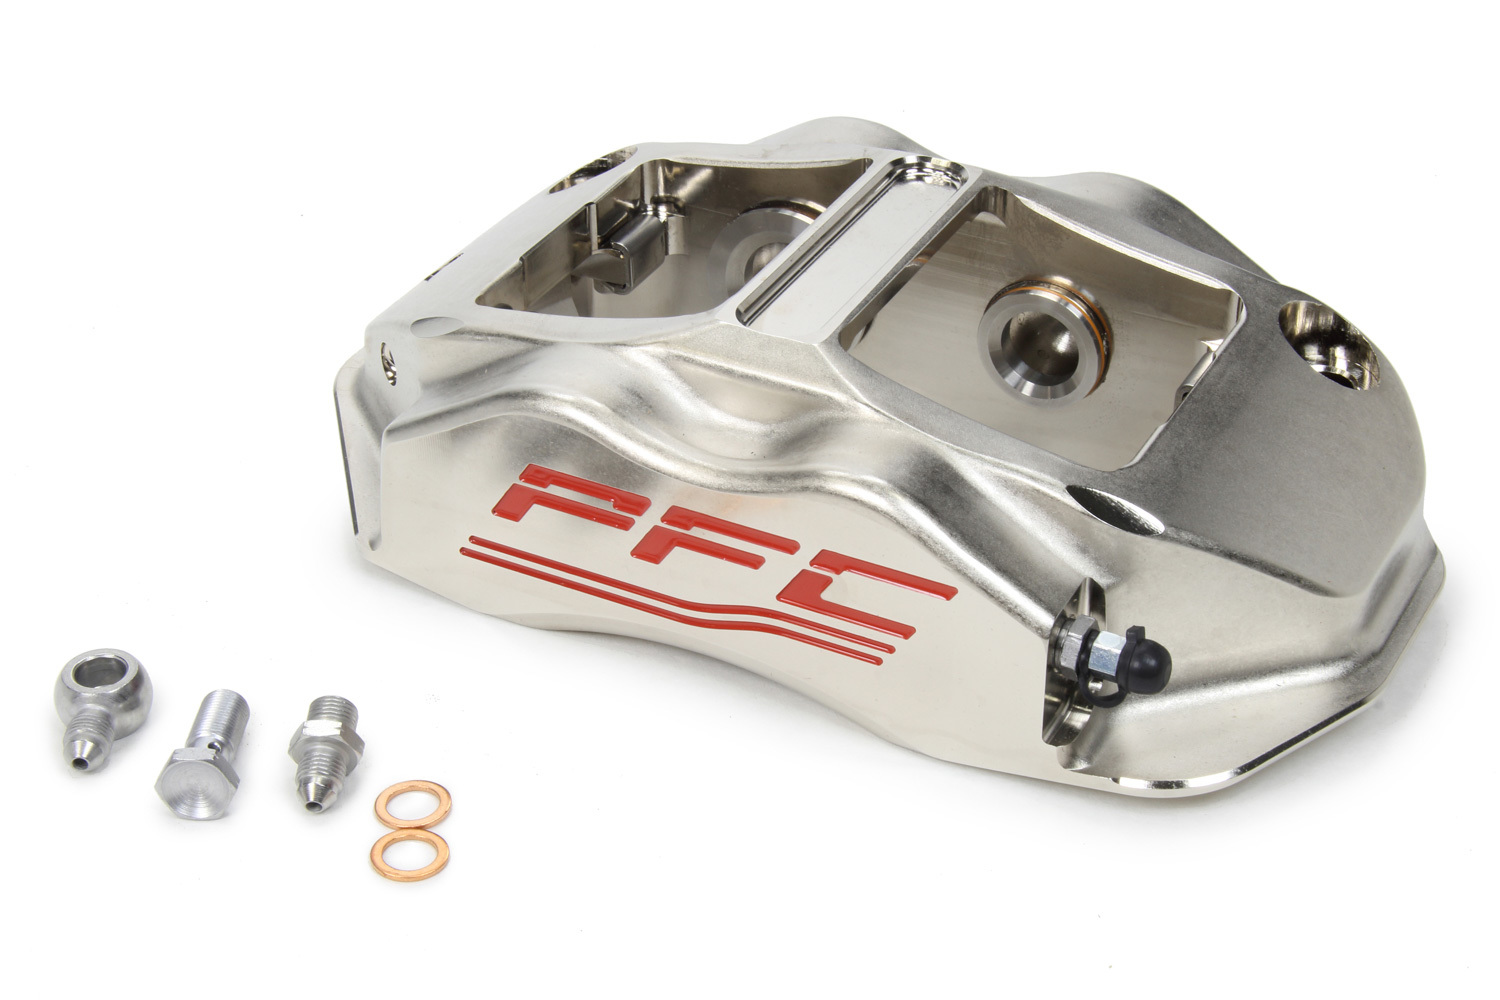 Performance Friction 94.323.410.440.01 Brake Caliper, ZR94, Driver Side, Leading, 4 Piston, Aluminum, Nickel Plated, 12.716 in OD, 1.250 in Thick Rotor, 7.00 in Radial Mount, Each